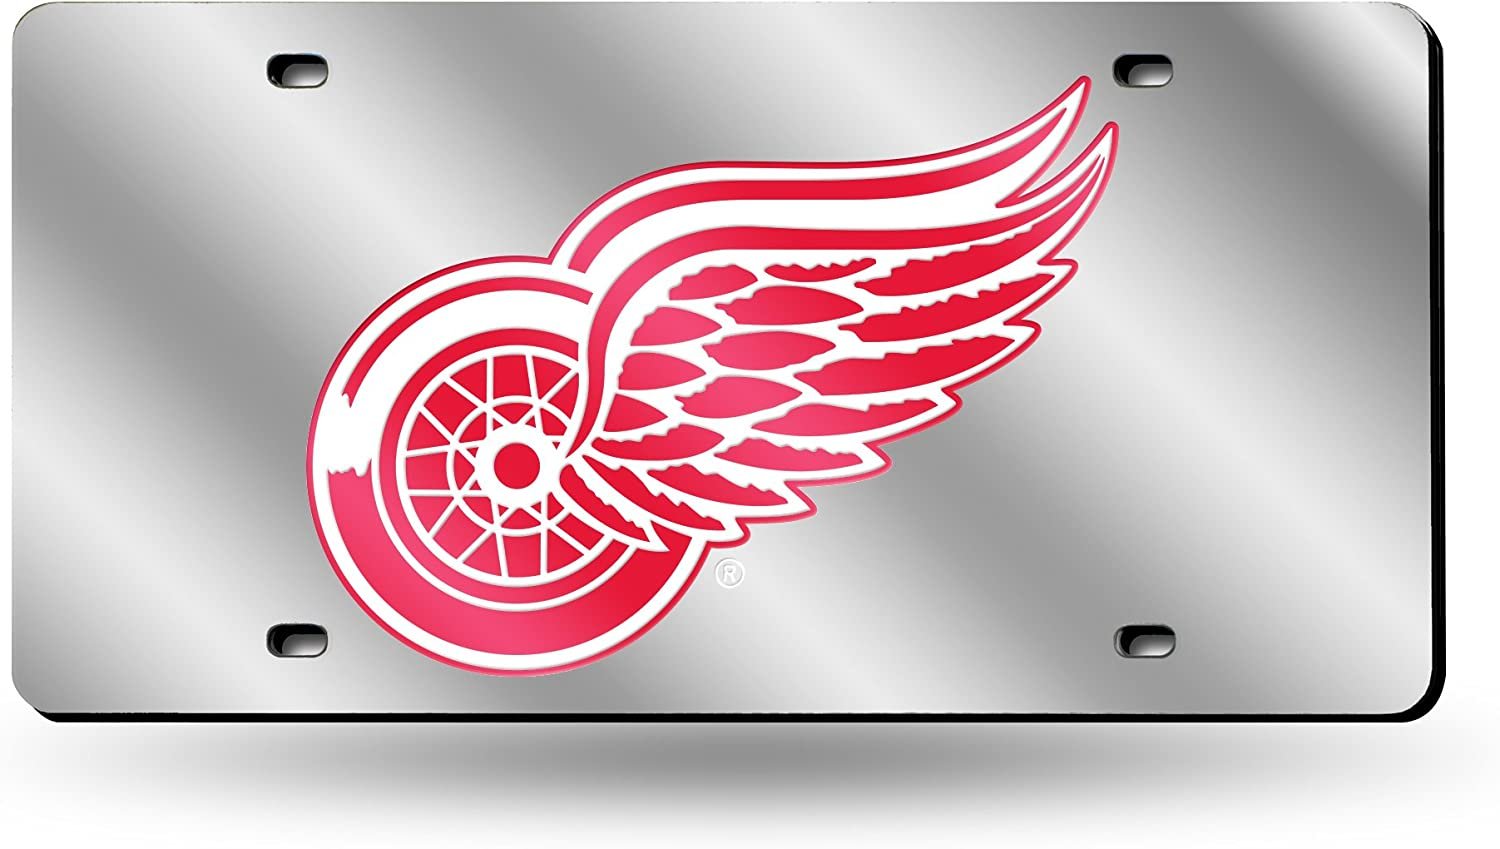 Detroit Red Wings Premium Laser Cut Tag License Plate, Mirrored Acrylic Inlaid, 12x6 Inch